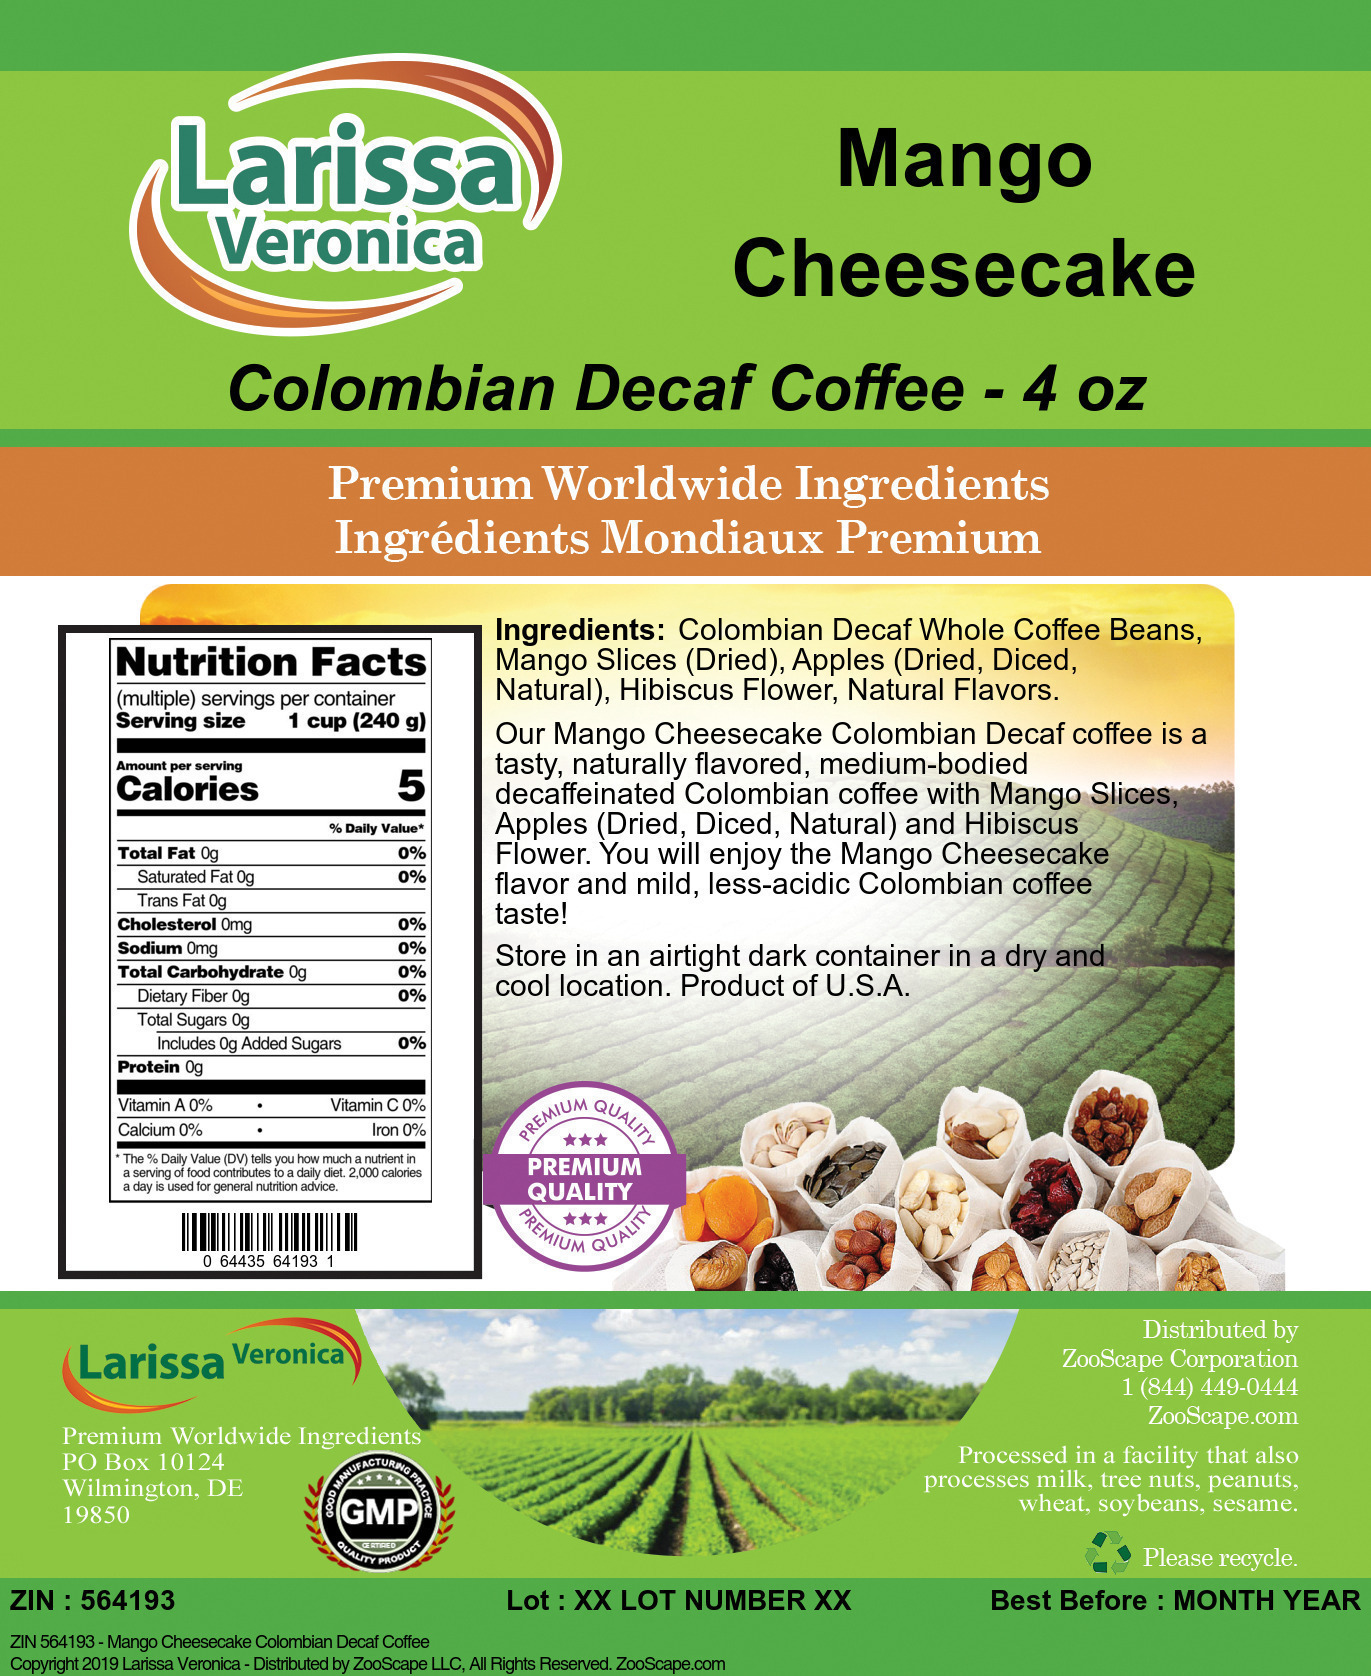 Mango Cheesecake Colombian Decaf Coffee - Label